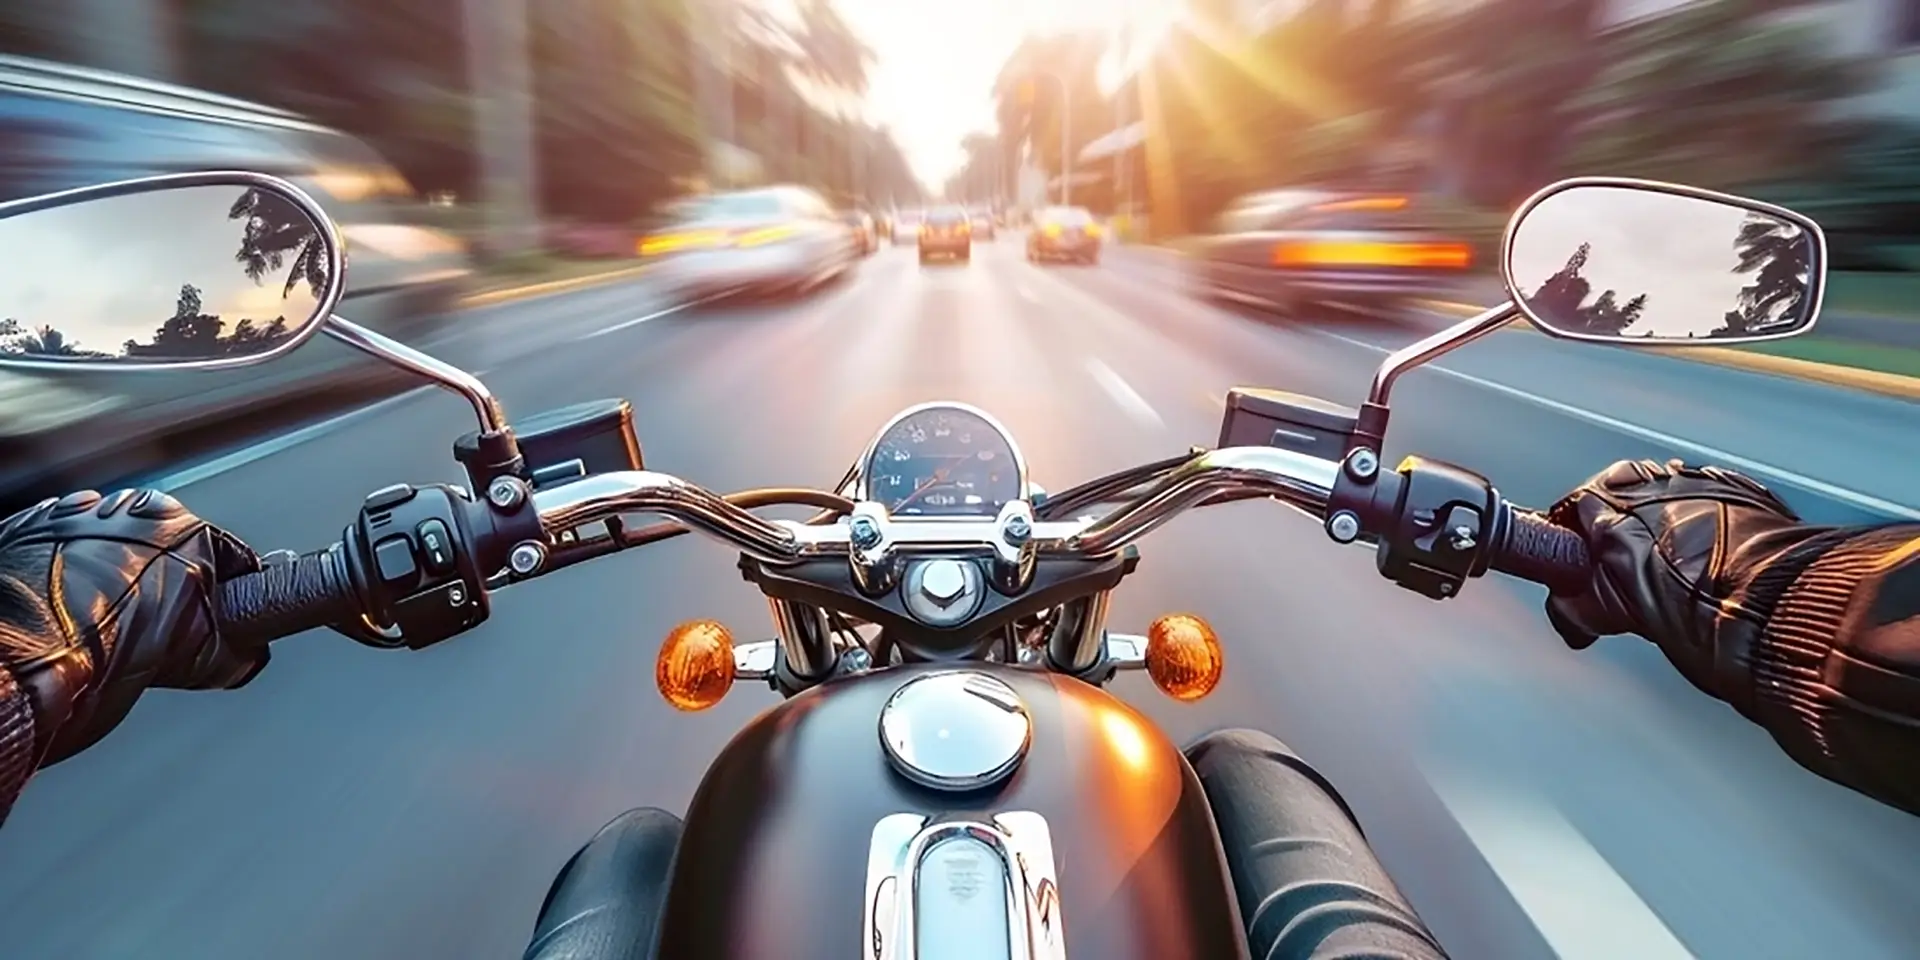   
																St. Petersburg Motorcycle Accident Attorney 
															 